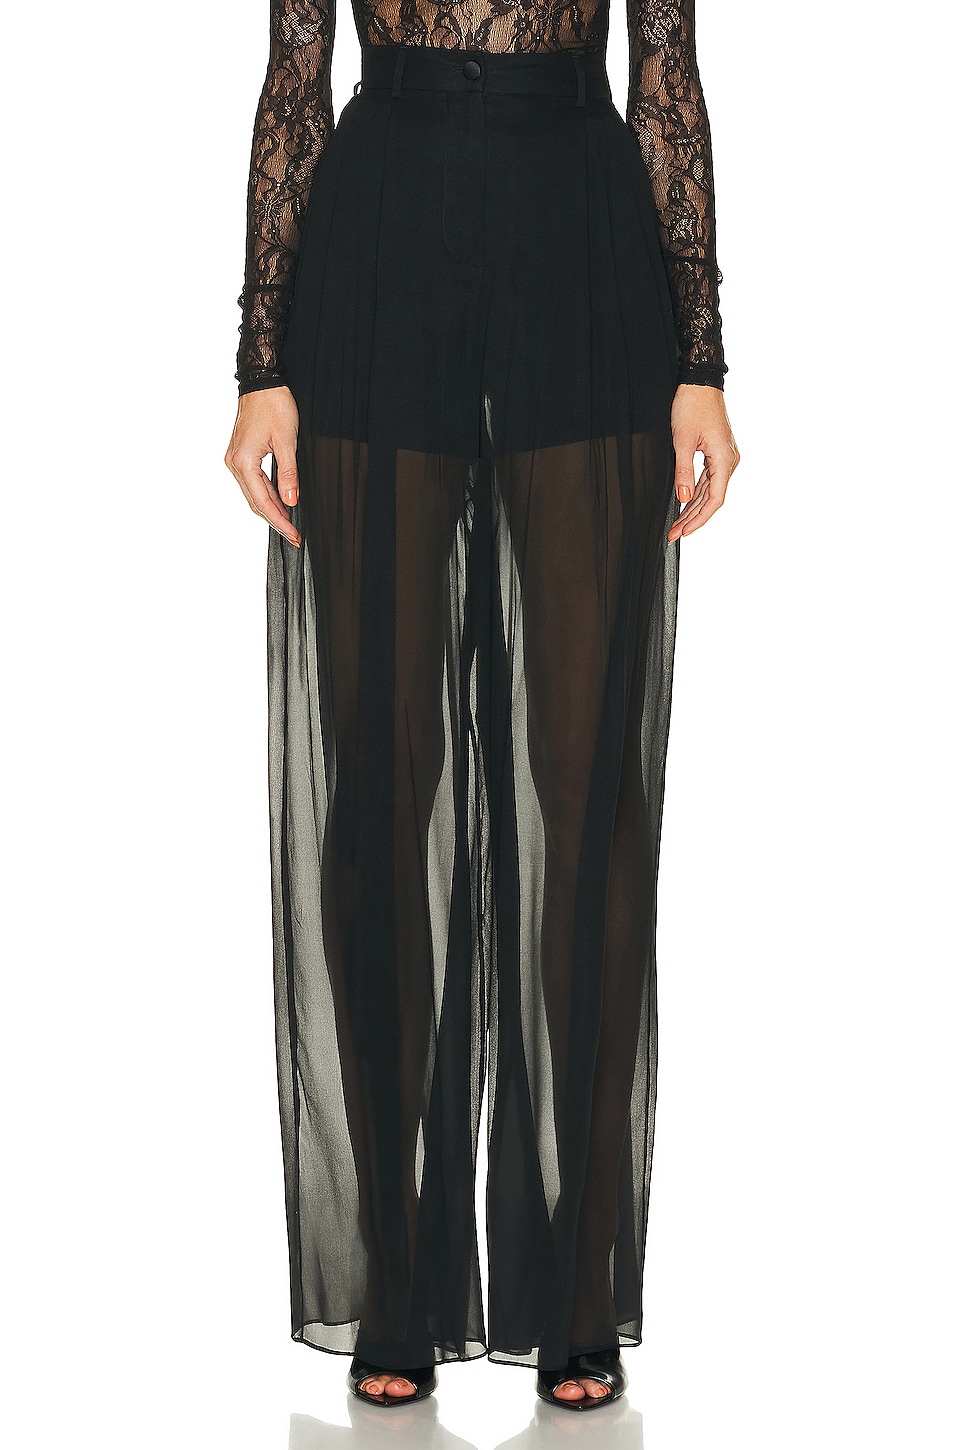 Image 1 of Dolce & Gabbana High Waist Flare Pant in Nero